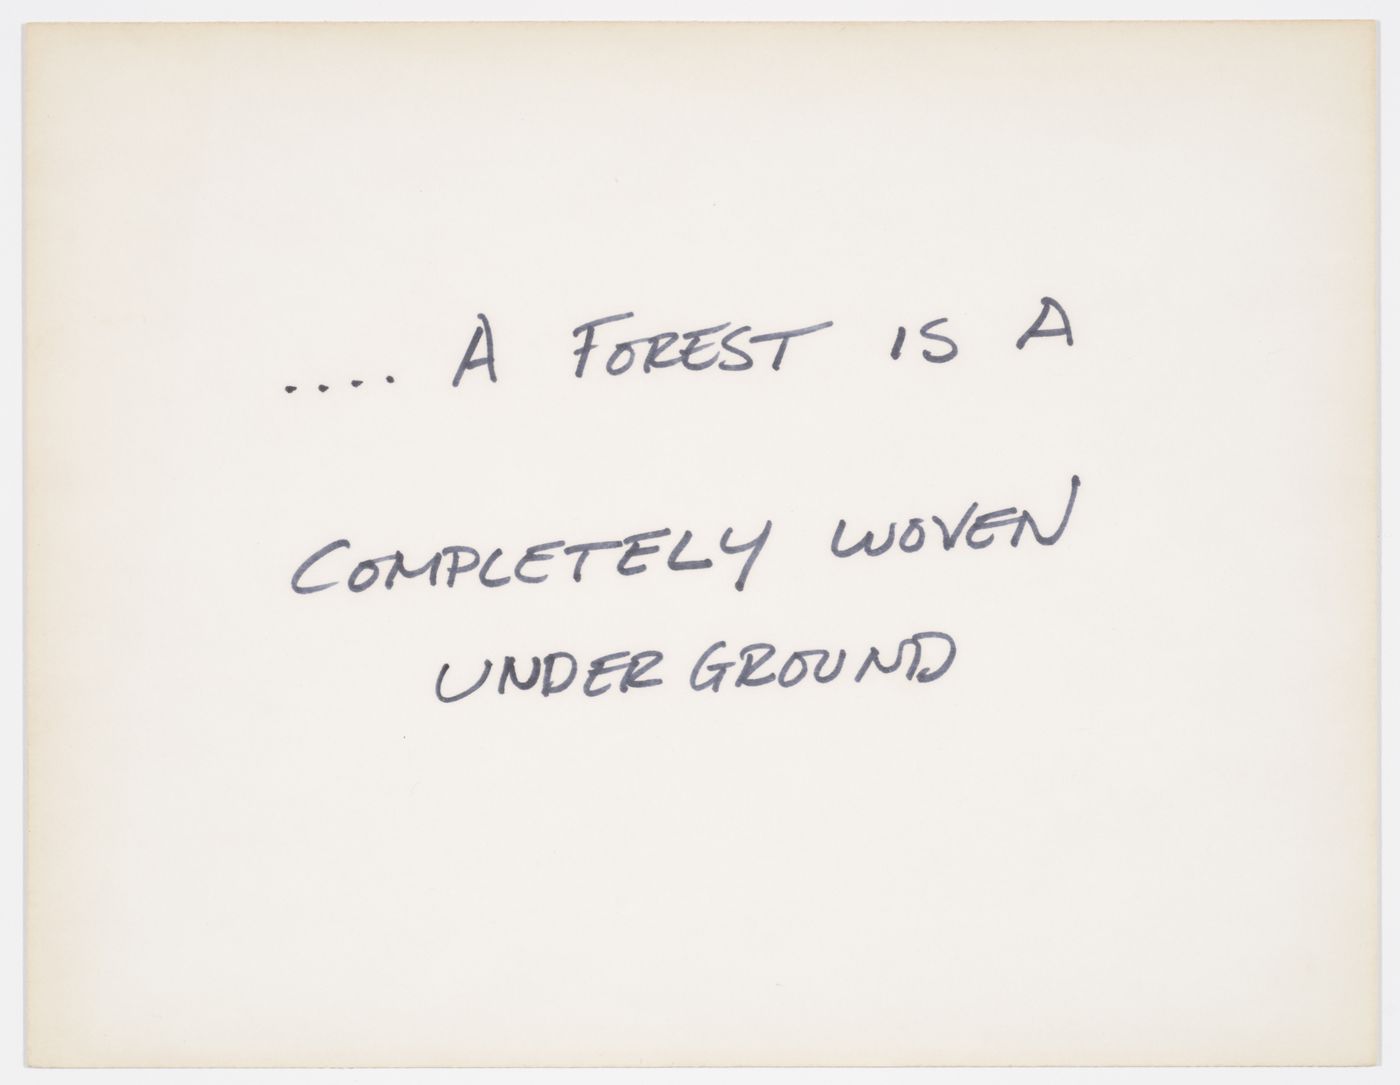 ...A forest is a  completely woven underground